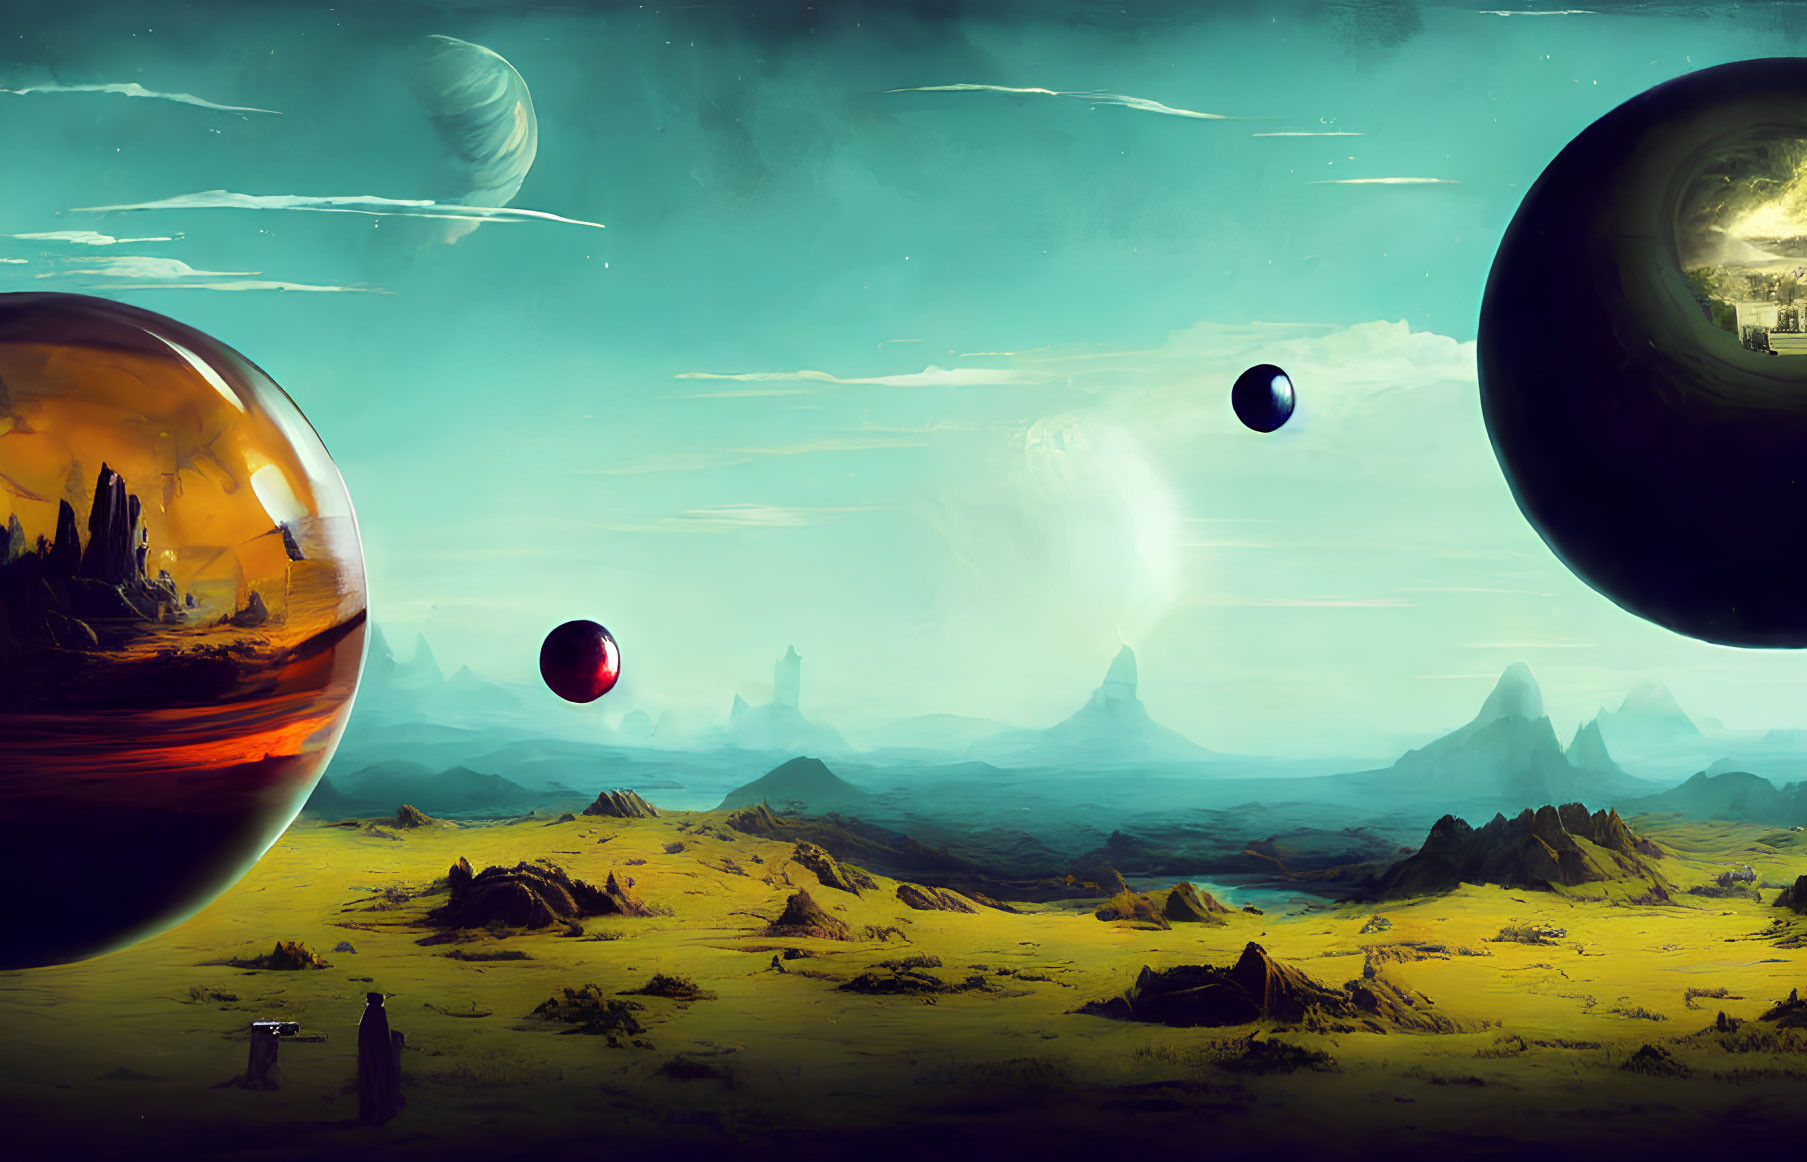 Surreal landscape with multiple planets, person, and fantastical terrains